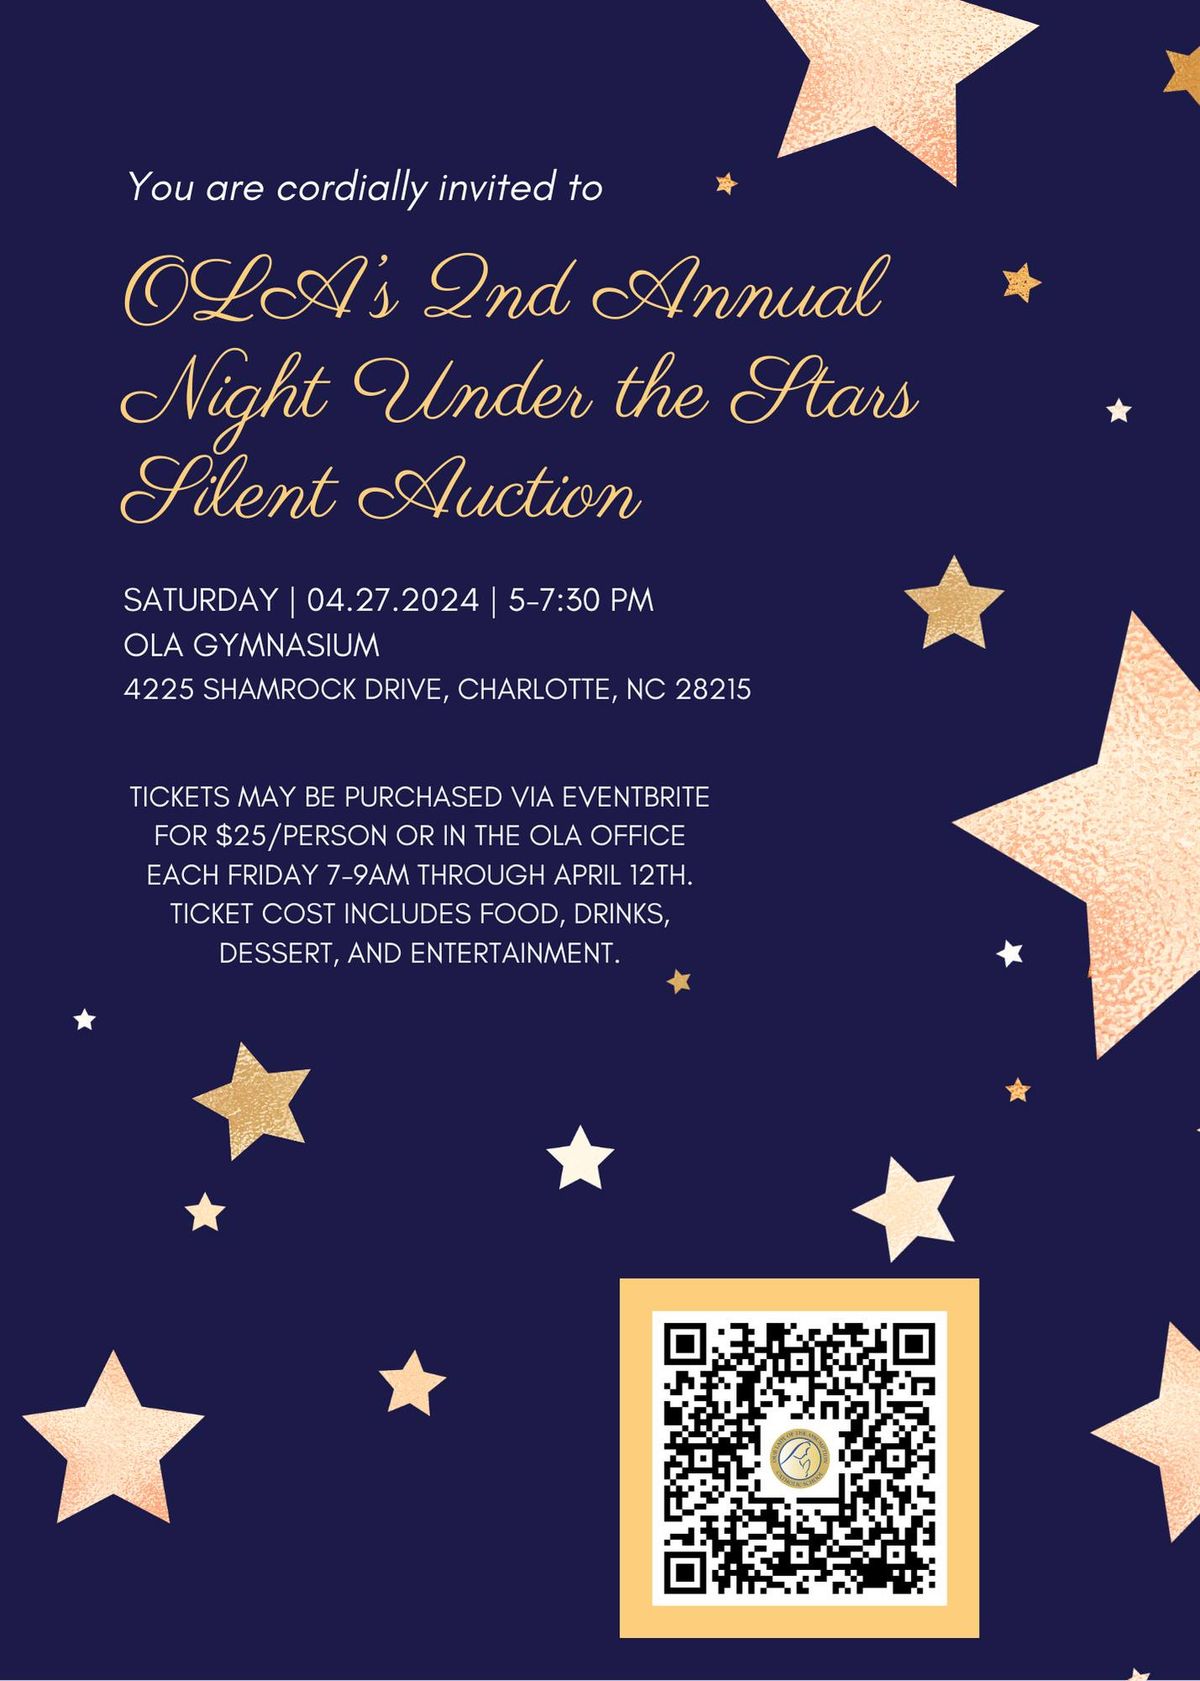 OLA's 2nd Annual Night Under the Stars Silent Auction